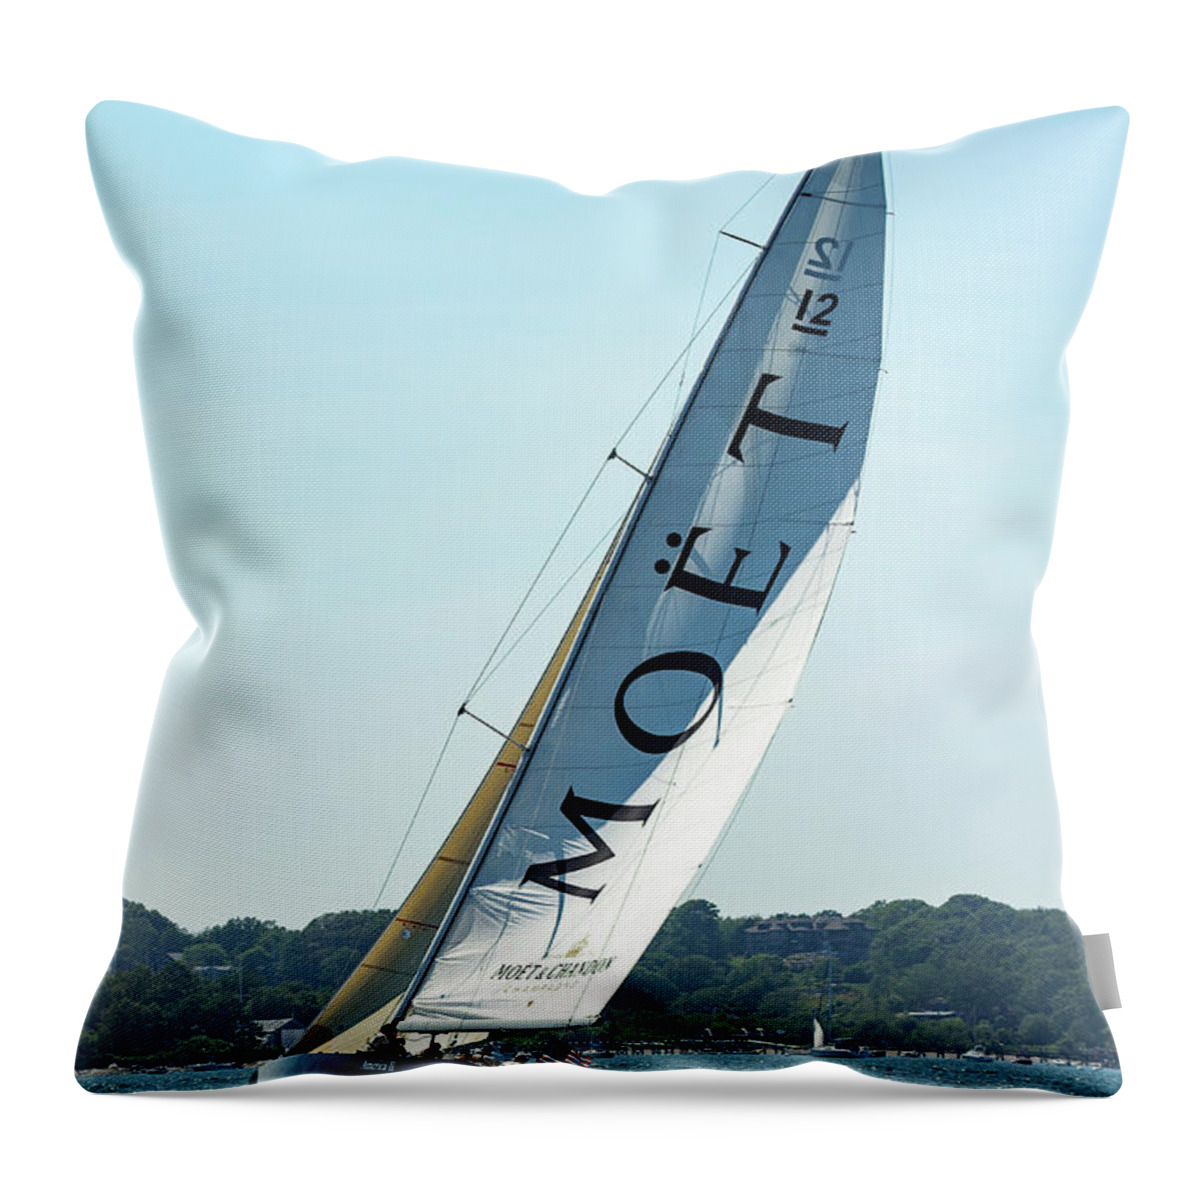 Moet Throw Pillow featuring the photograph Moet Sailing by Denise Kopko